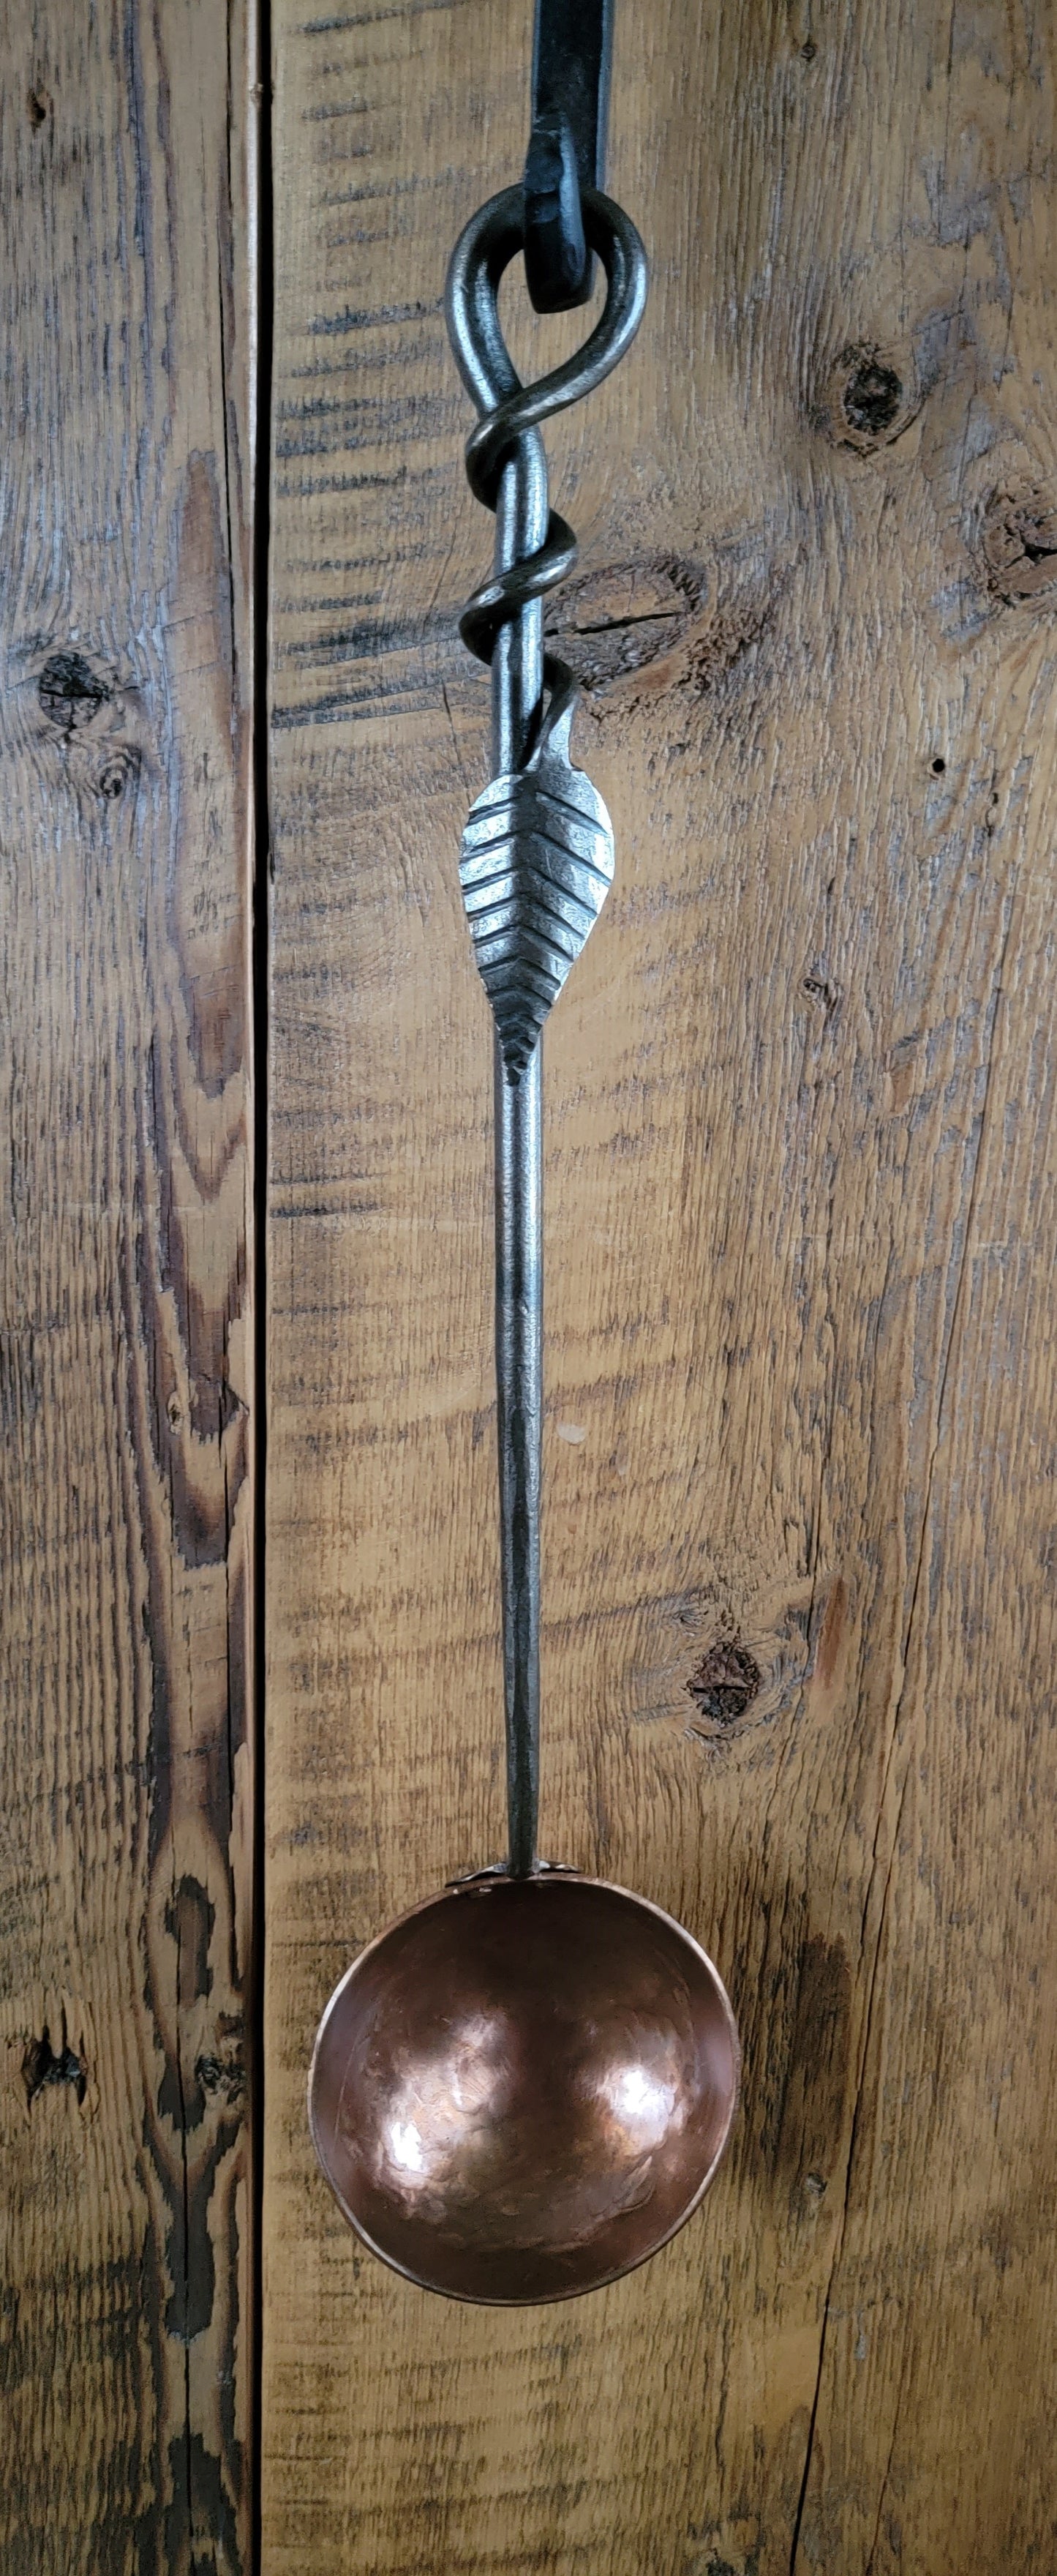 Hand Forged Solid Copper Egg Spoon With Steel Leaf Handle